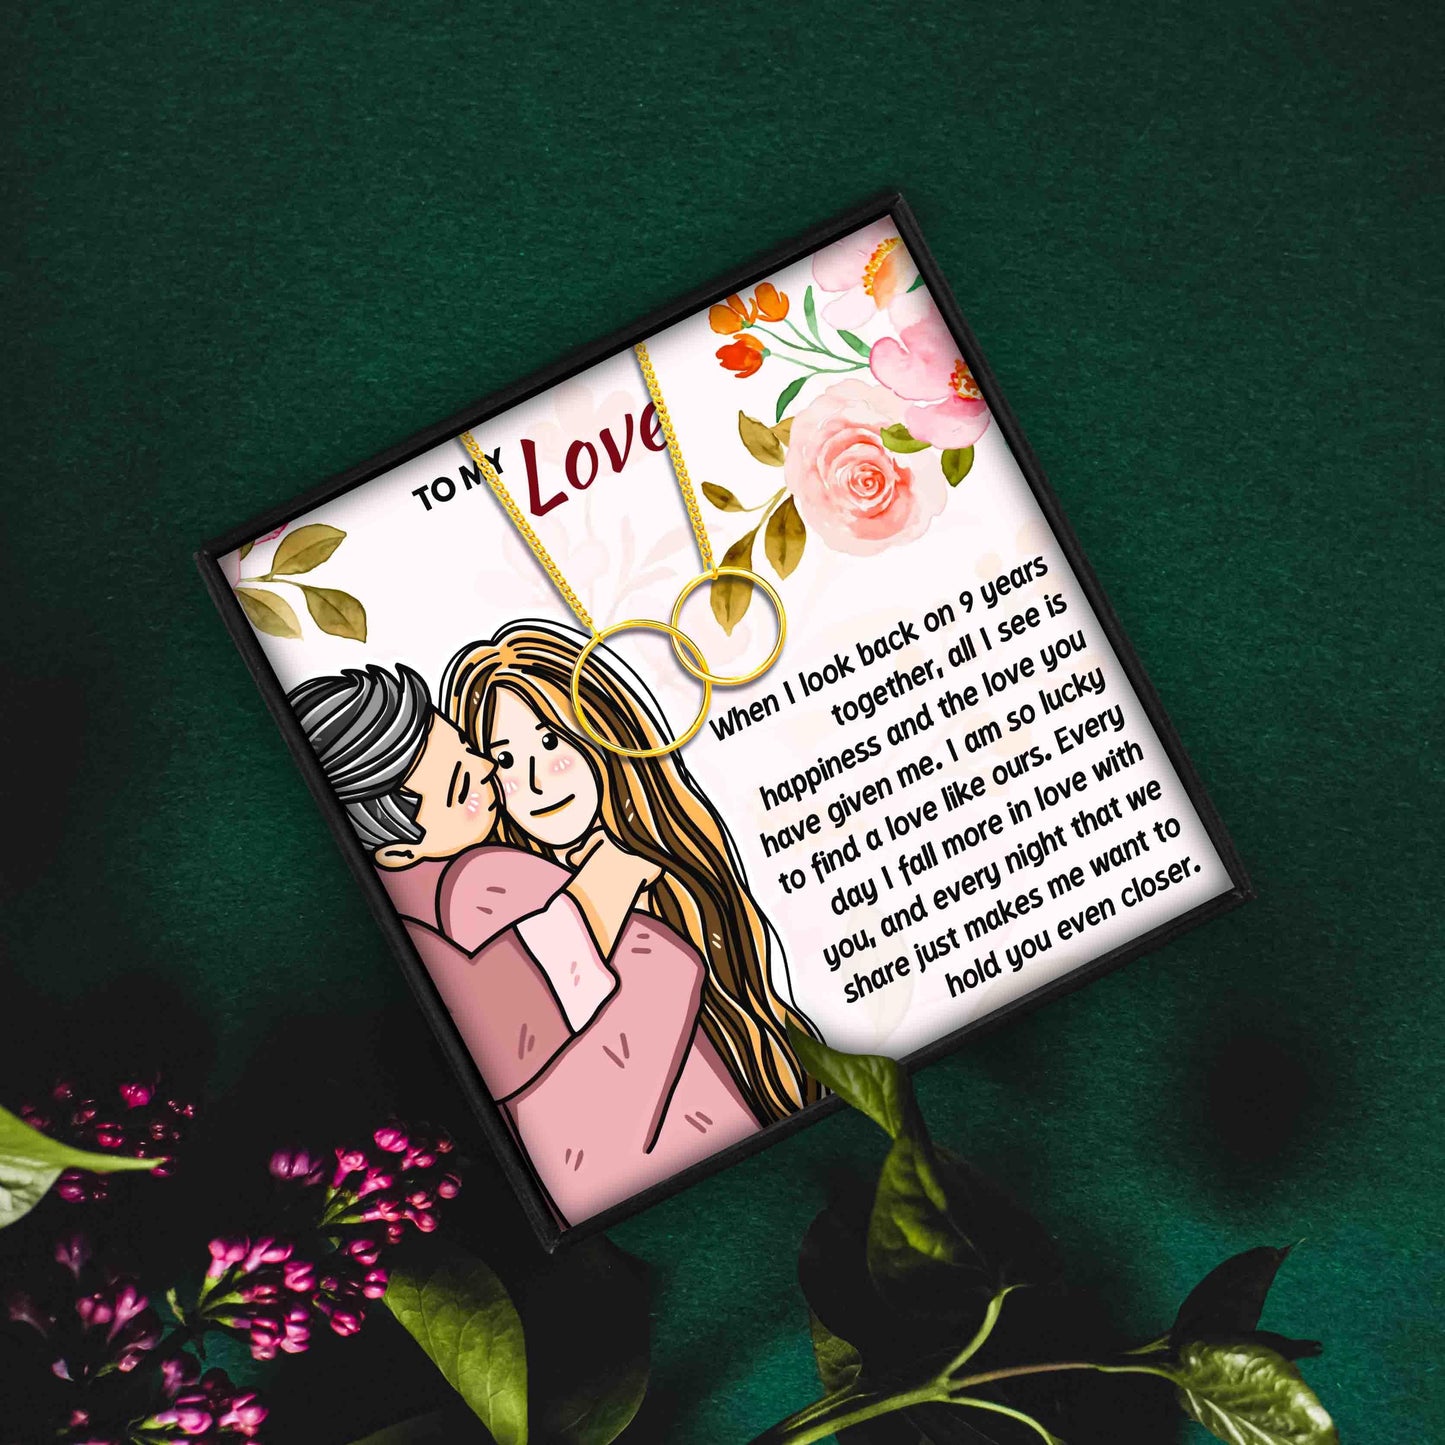 9 Year Wedding Anniversary Gift For Her in 2023 | 9 Year Wedding Anniversary Gift For Her - undefined | 9 year anniversary gift modern, 9th anniversary gift for her, 9th year anniversary gift, Anniversary Gifts | From Hunny Life | hunnylife.com